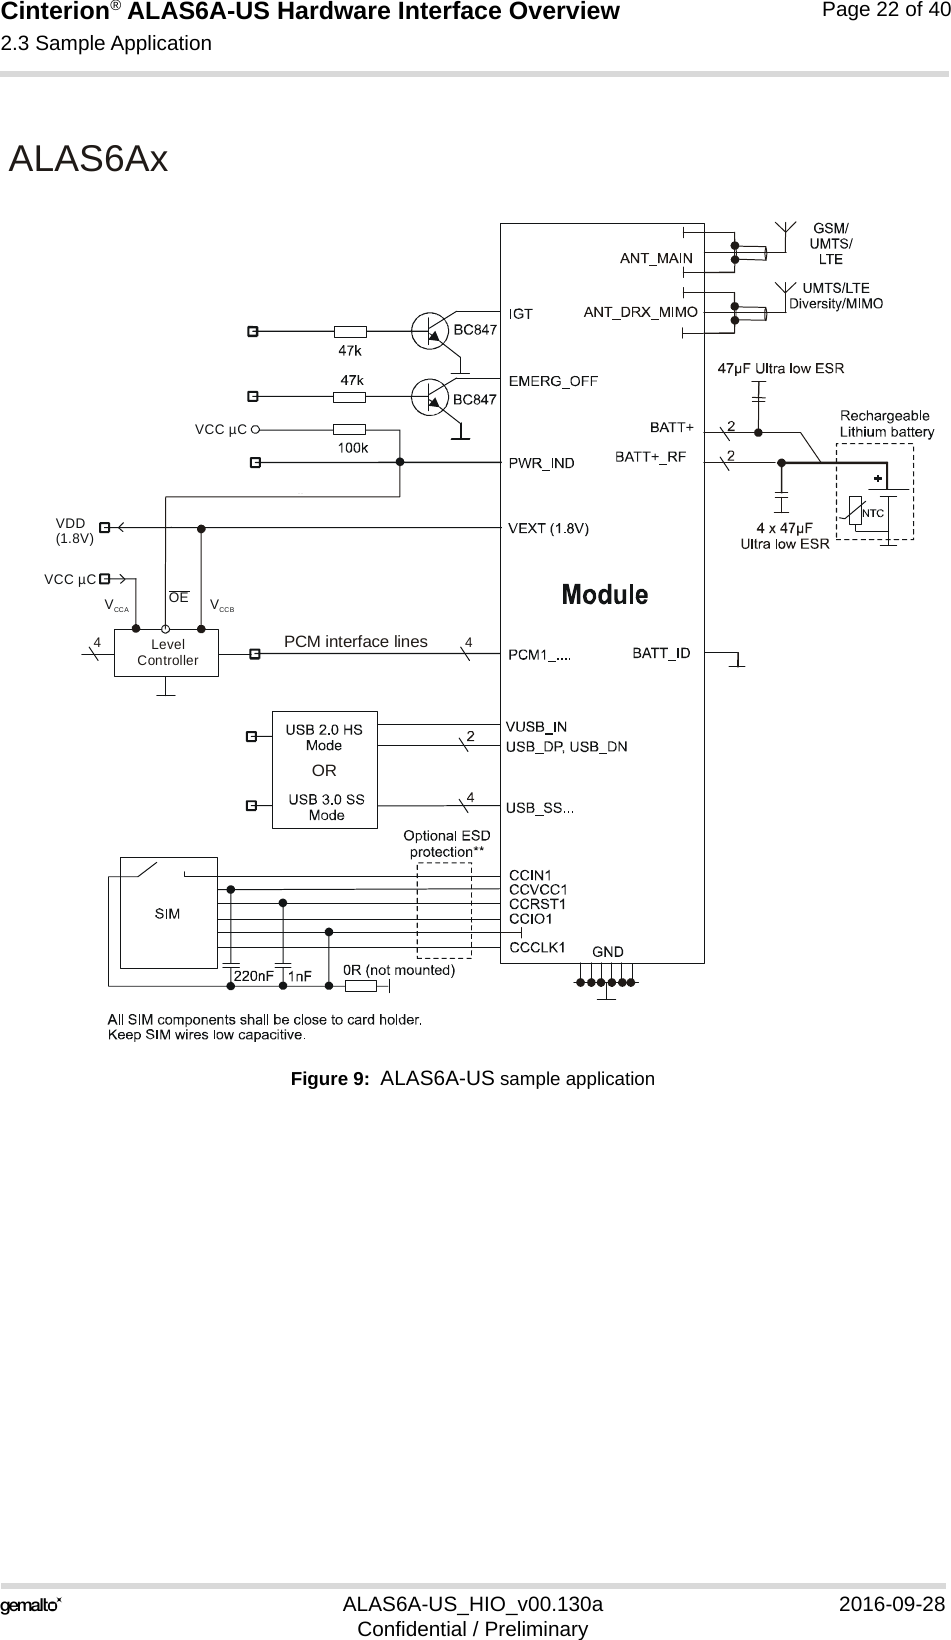 Cinterion® ALAS6A-US Hardware Interface Overview2.3 Sample Application22ALAS6A-US_HIO_v00.130a 2016-09-28Confidential / PreliminaryPage 22 of 40Figure 9:  ALAS6A-US sample applicationALAS6Ax VCC µC4LevelController4VCCBVCCAVCC µCVDD(1.8V)OEPCM interface lines OR